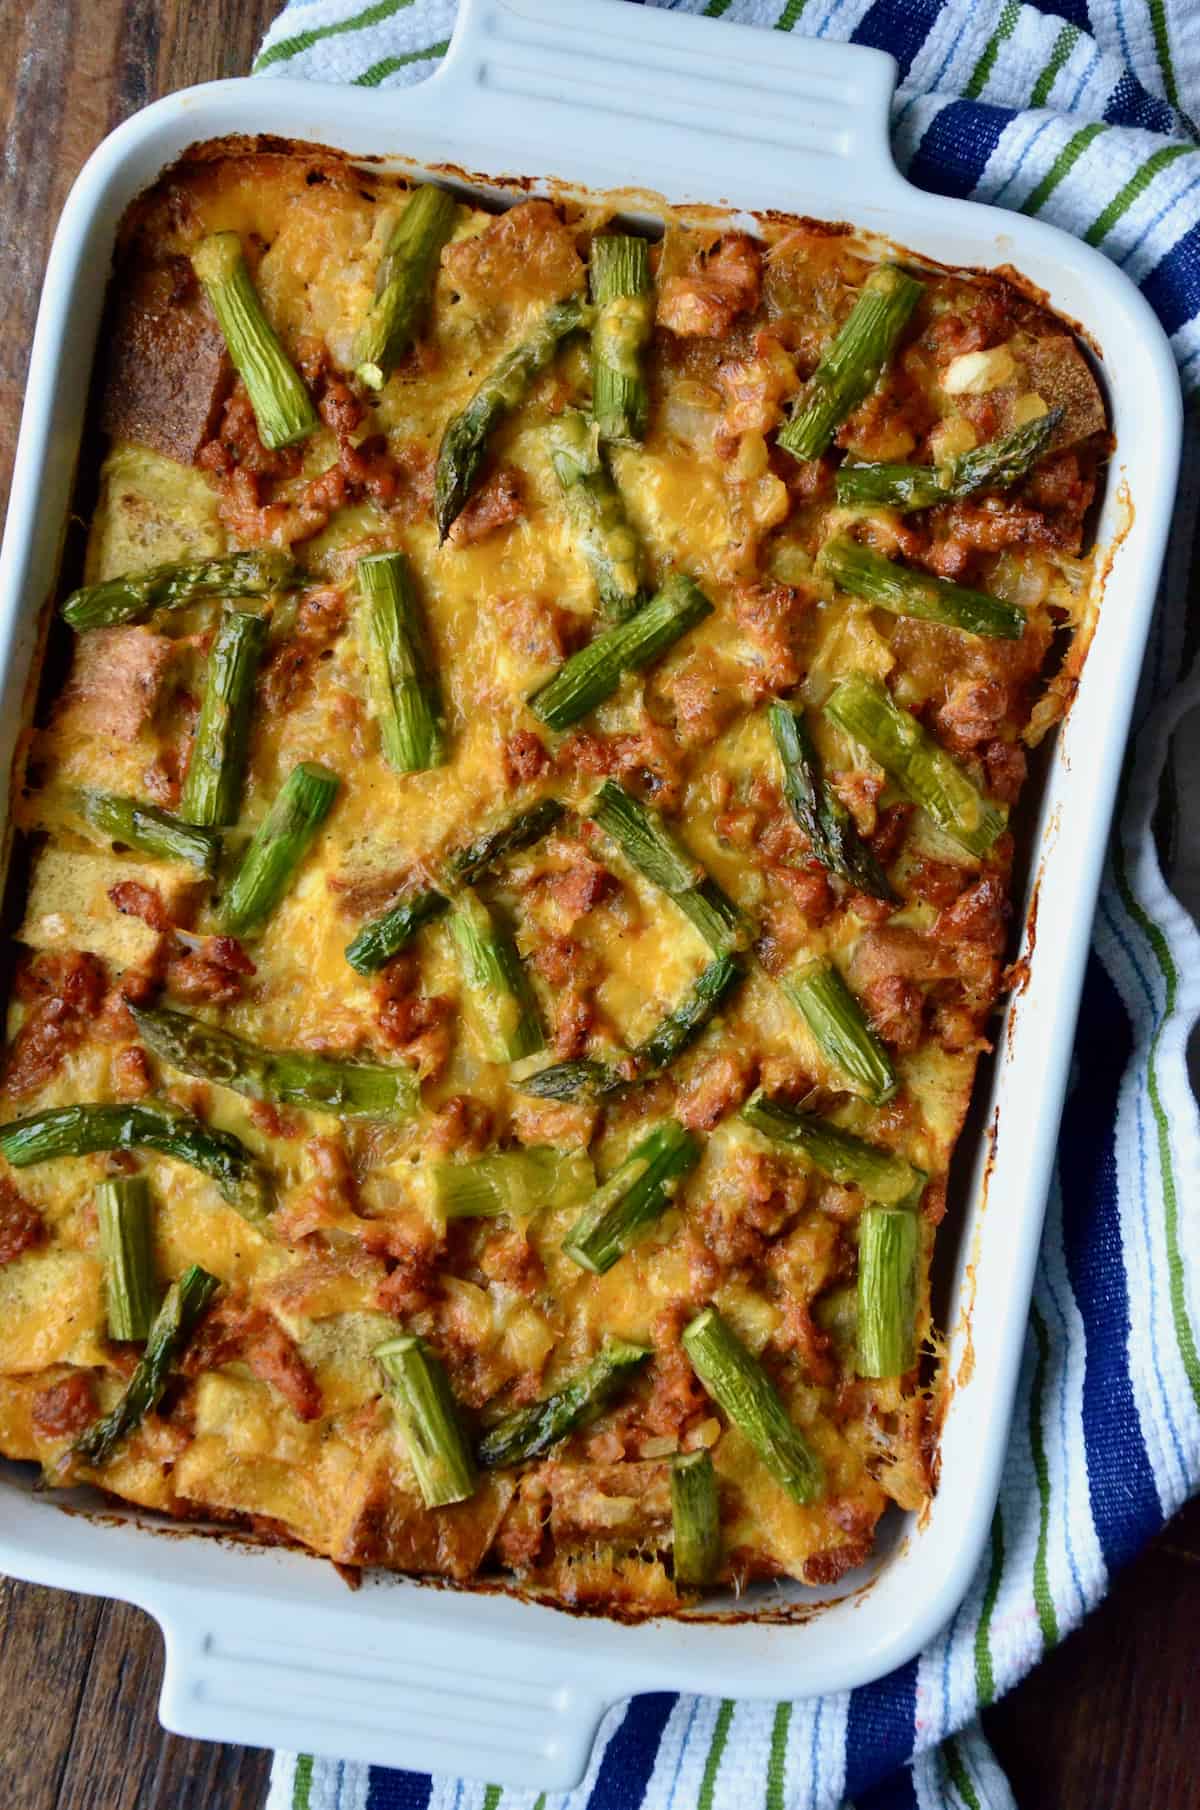 A casserole dish holding a baked breakfast strata with sausage and asparagus. The dish sits on a kitchen towel on a wooden table.